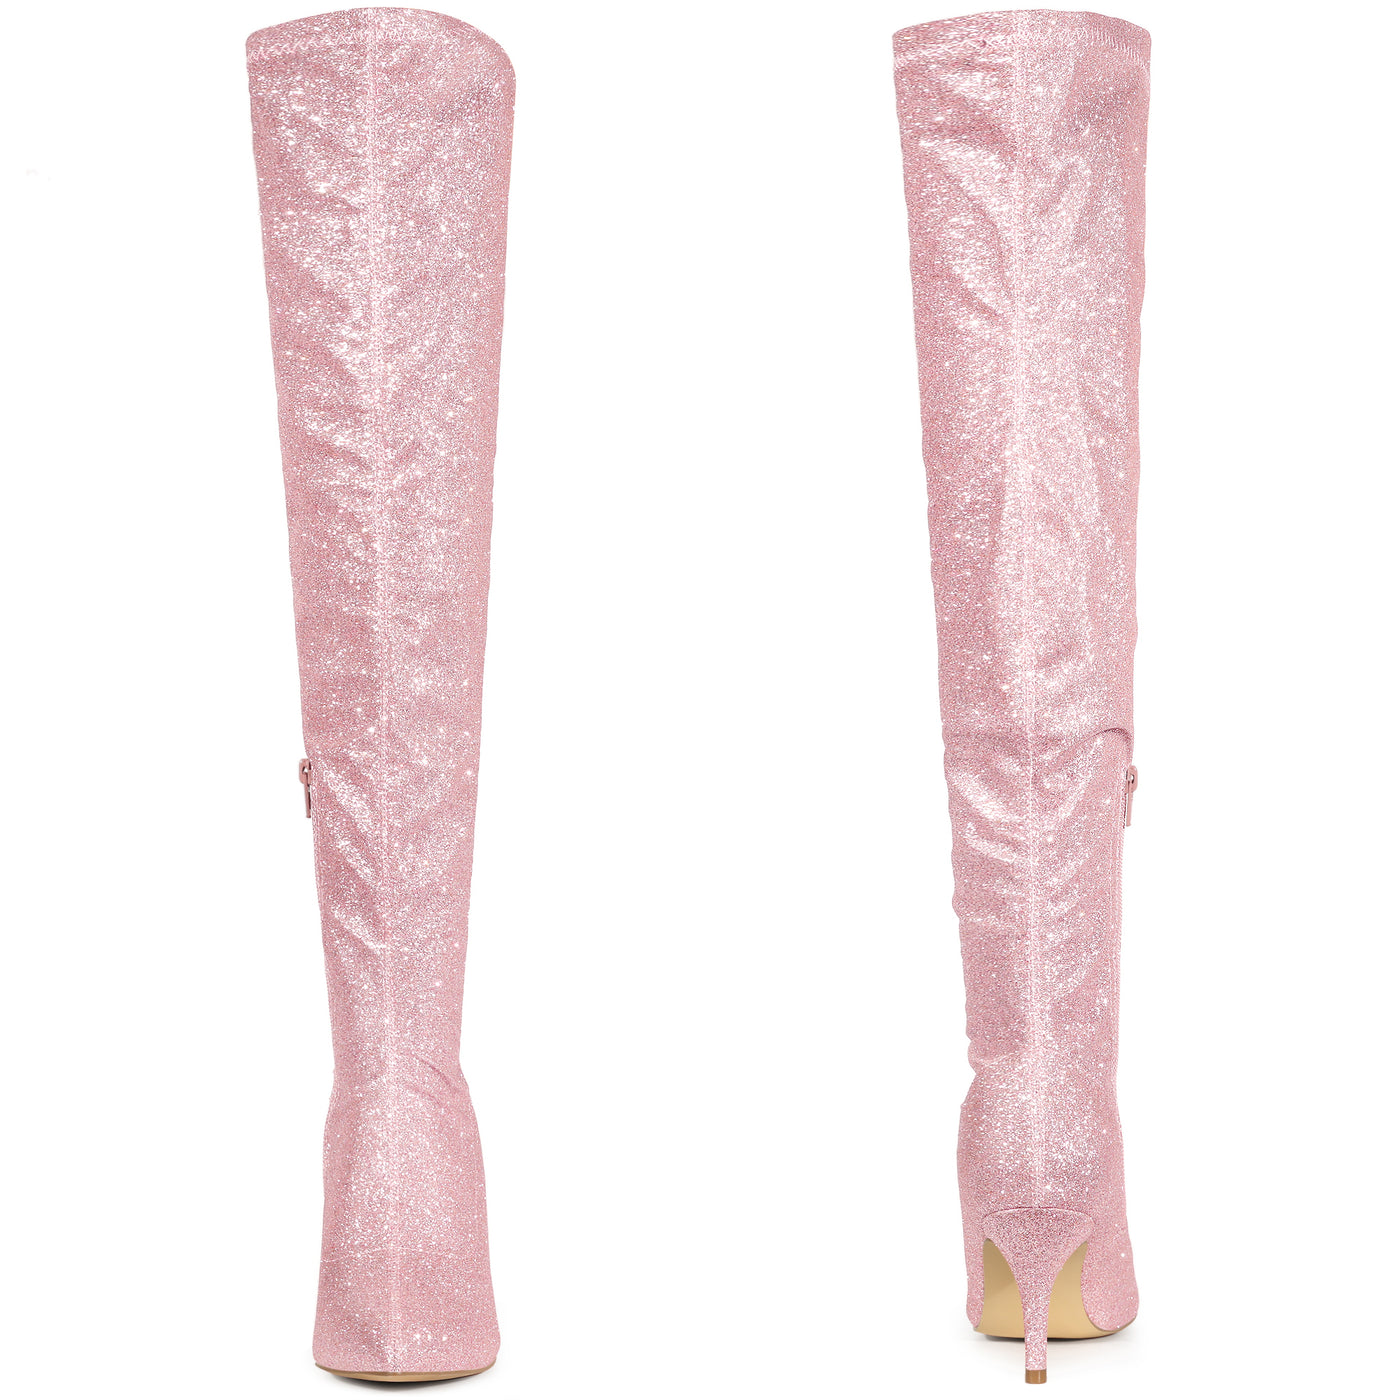 Bublédon Perphy Glitter Pointed Toe Stiletto Heels Over the Knee High Boots for Women